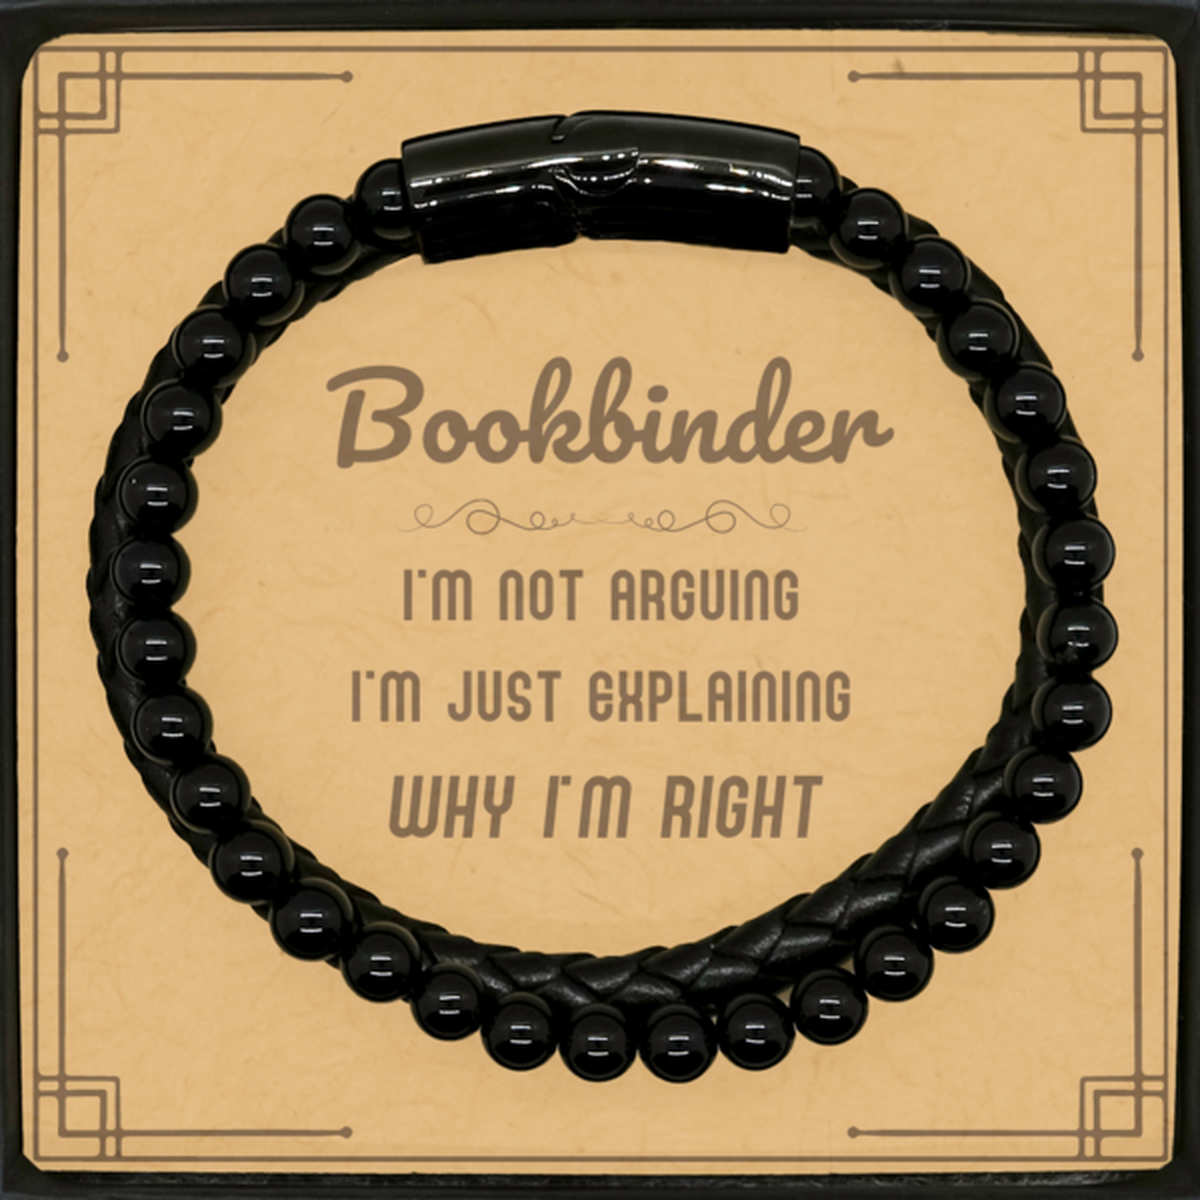 Bookbinder I'm not Arguing. I'm Just Explaining Why I'm RIGHT Stone Leather Bracelets, Funny Saying Quote Bookbinder Gifts For Bookbinder Message Card Graduation Birthday Christmas Gifts for Men Women Coworker